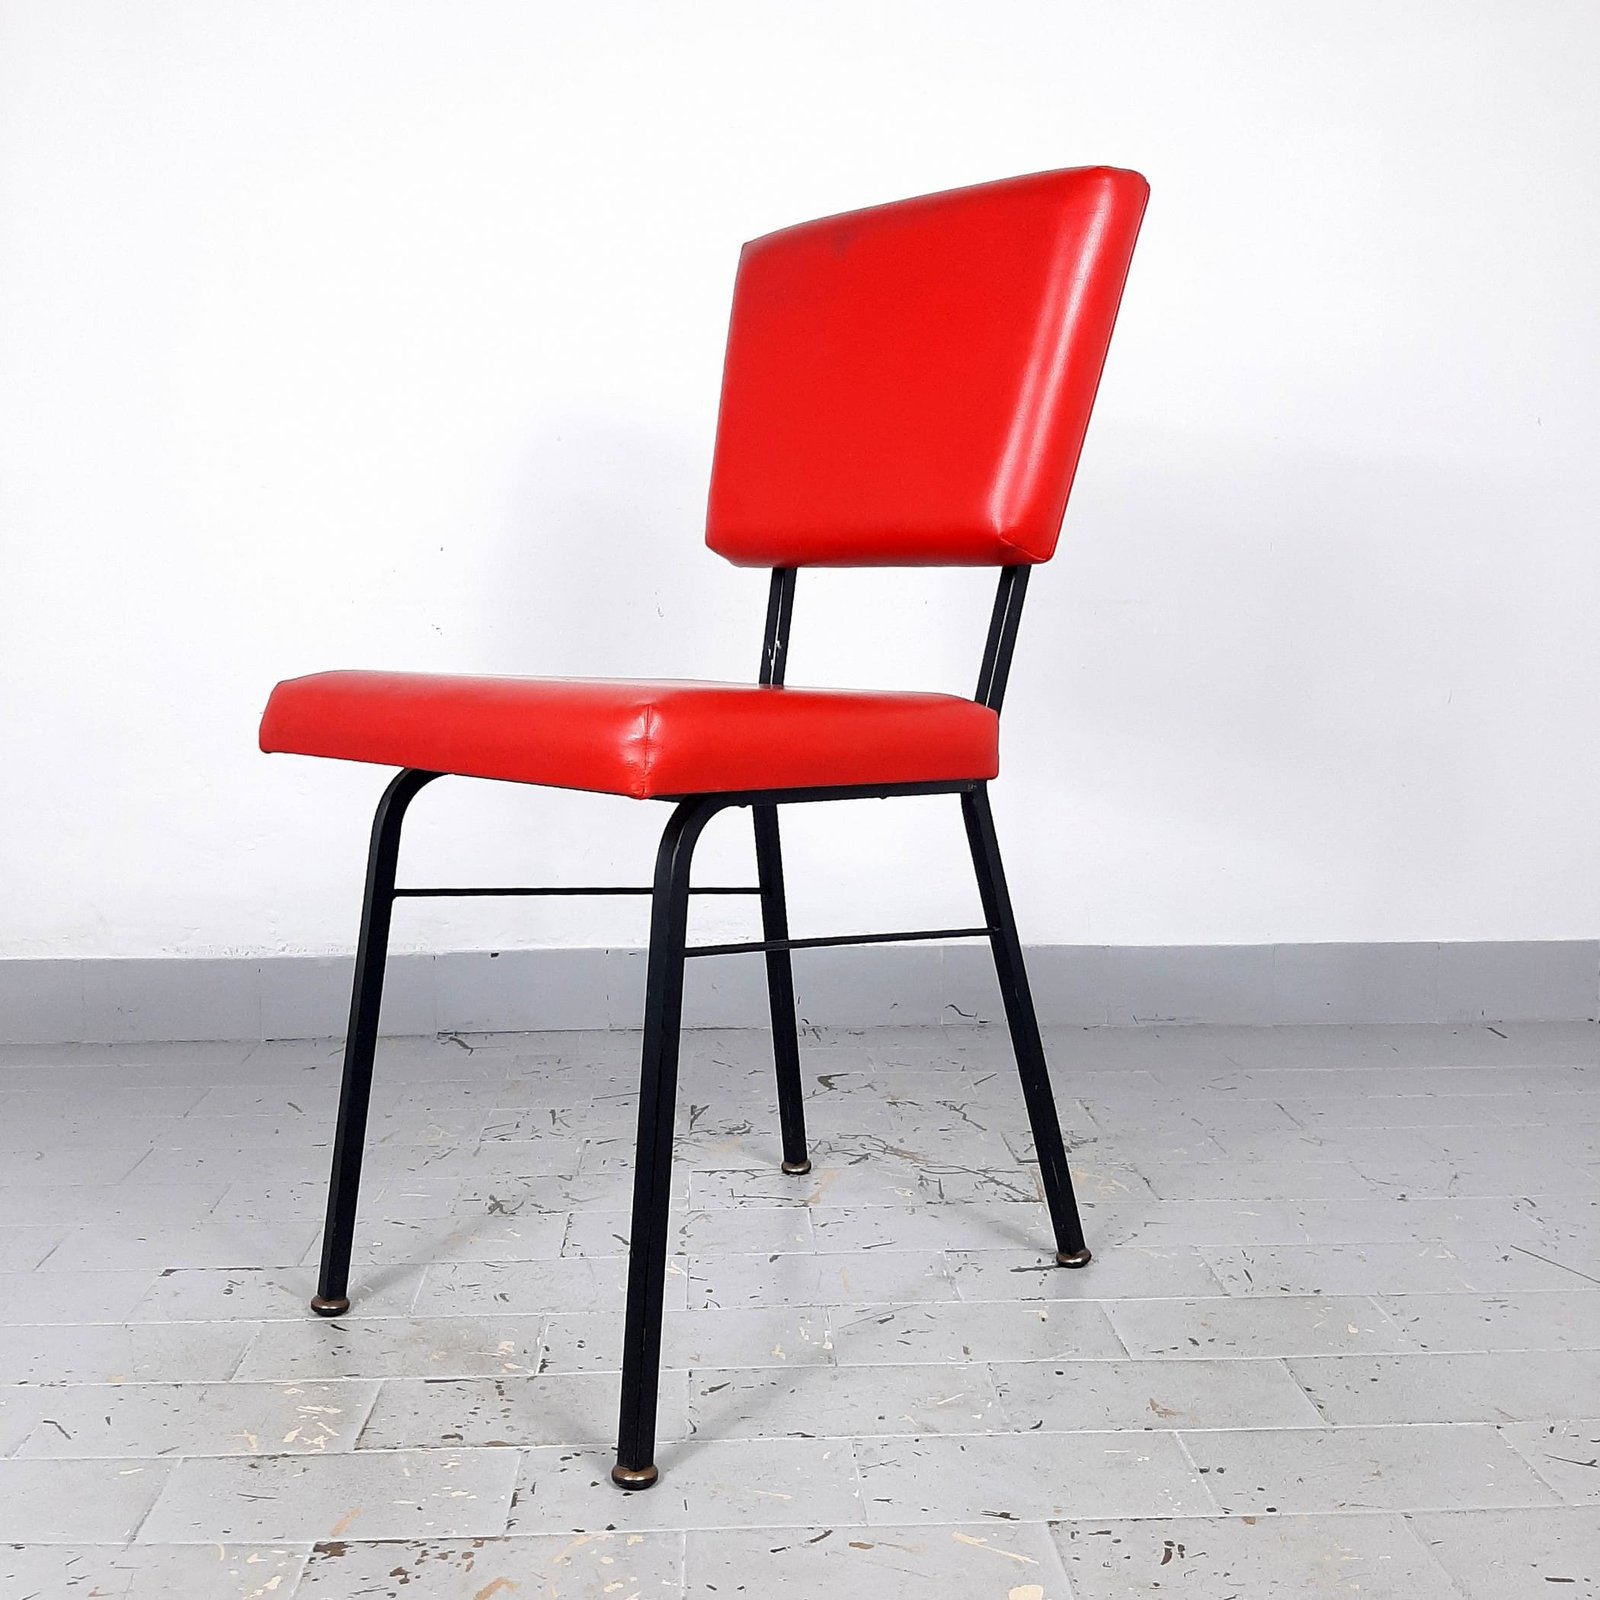 Retro dining chair Mobili Polli Italy 1969 Mid-century office chair Red desk chair